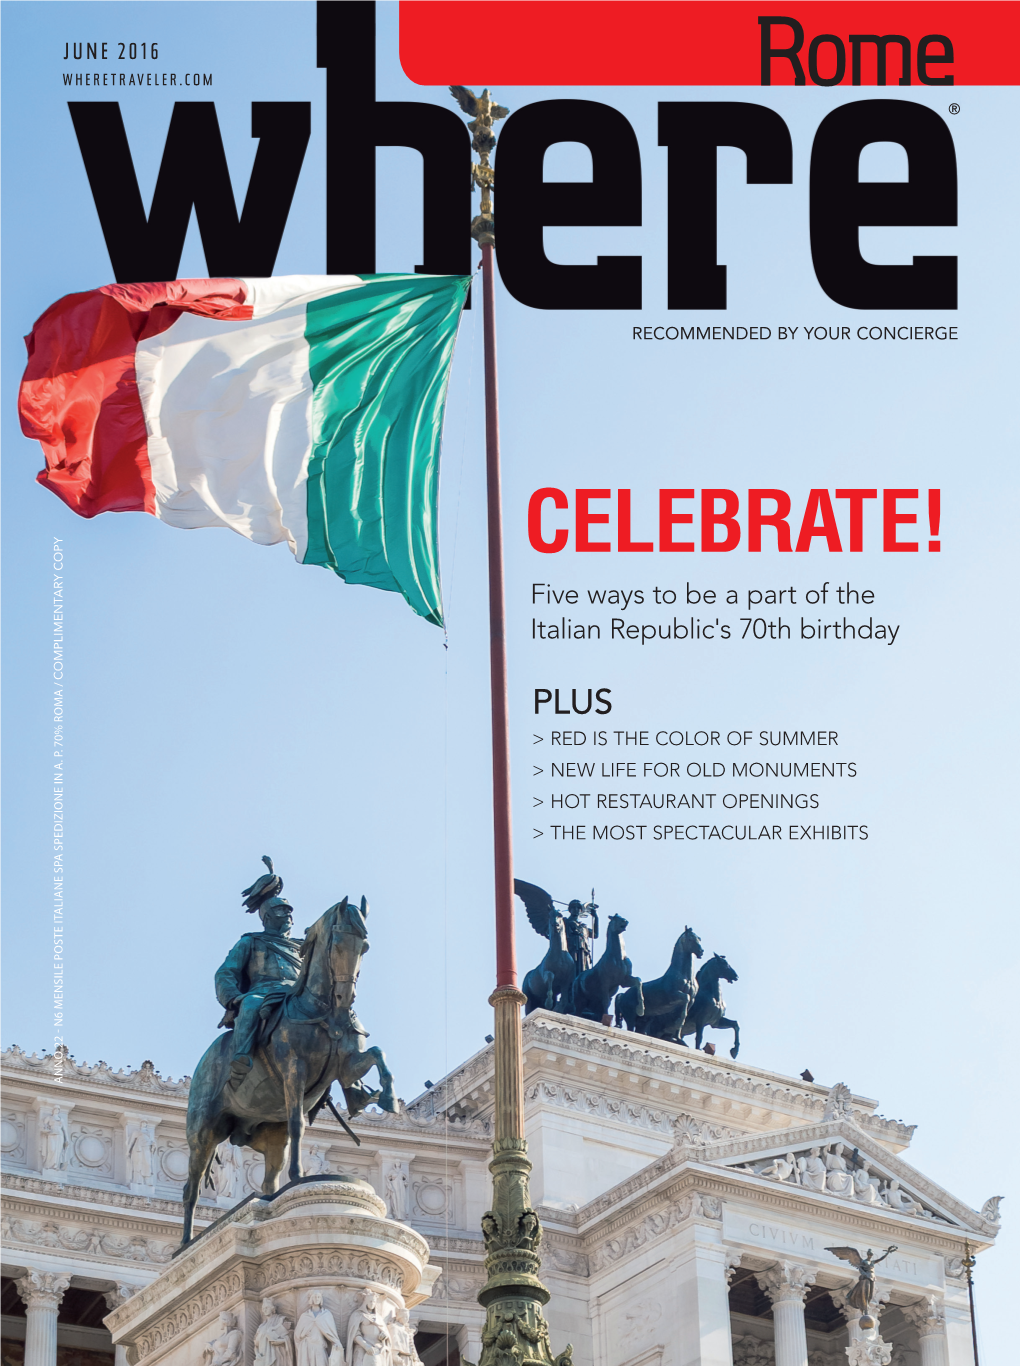 CELEBRATE! Five Ways to Be a Part of the Italian Republic's 70Th Birthday COMPLIMENTARY COPY